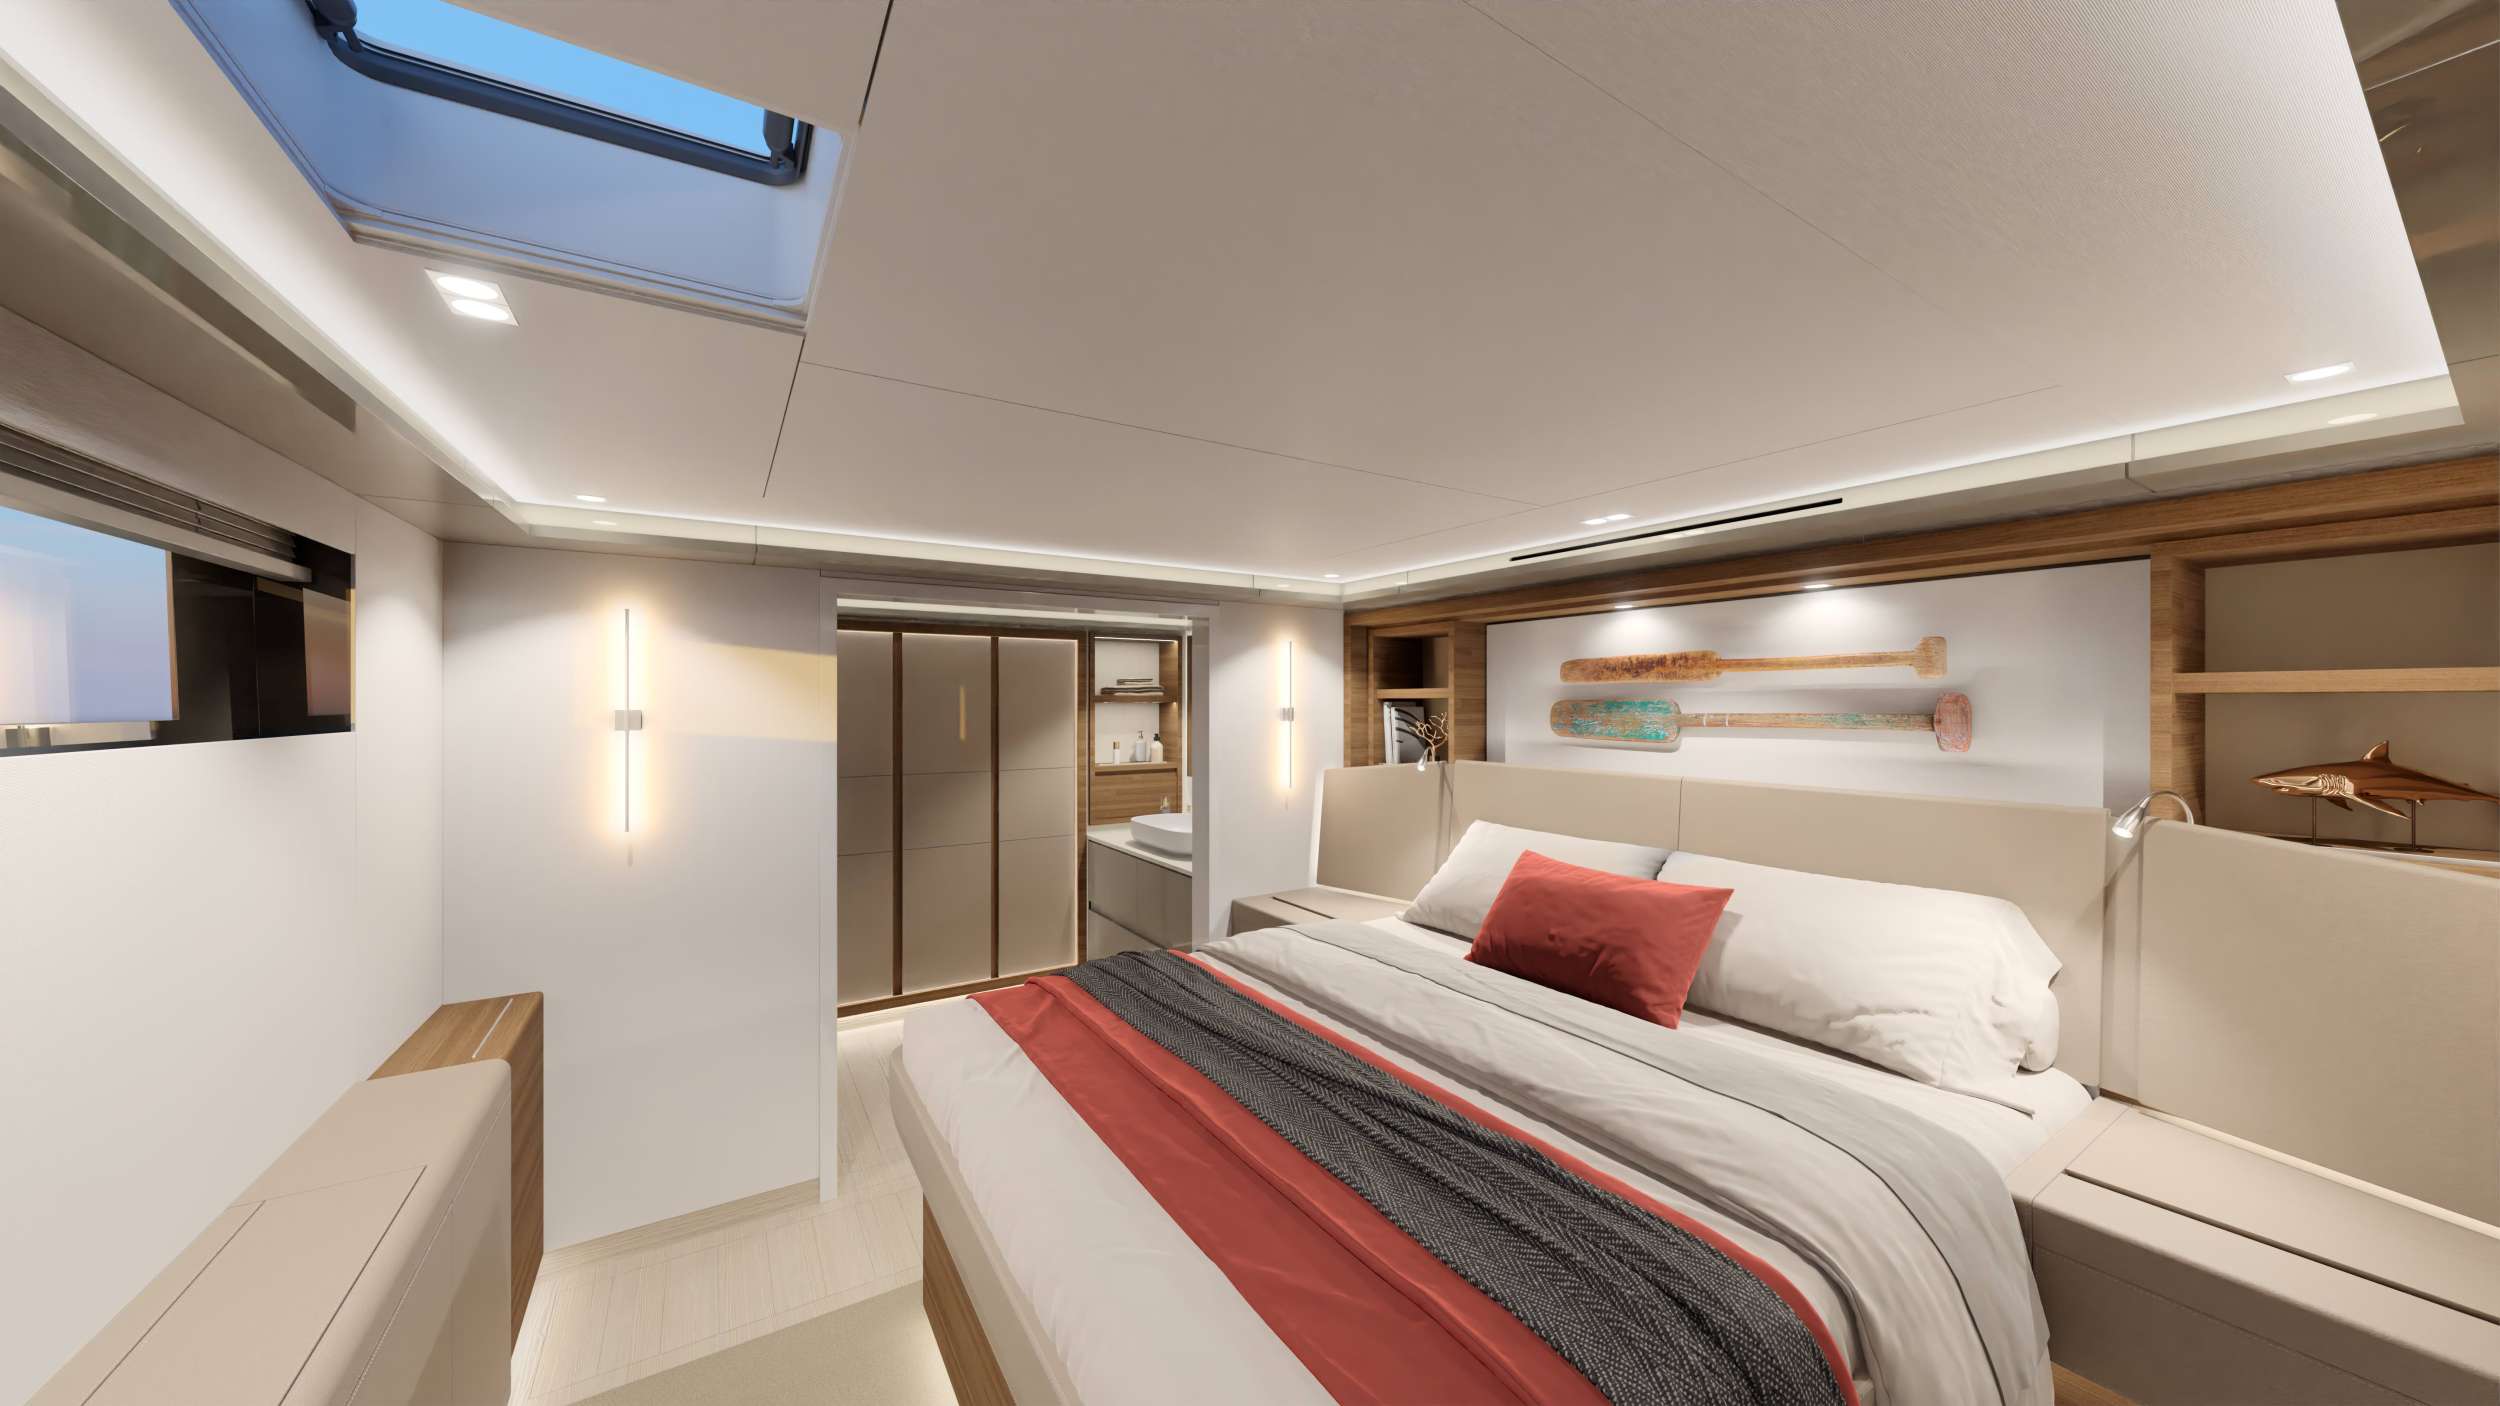 AD ASTRA Yacht Charter - Artist renderings / Master cabin